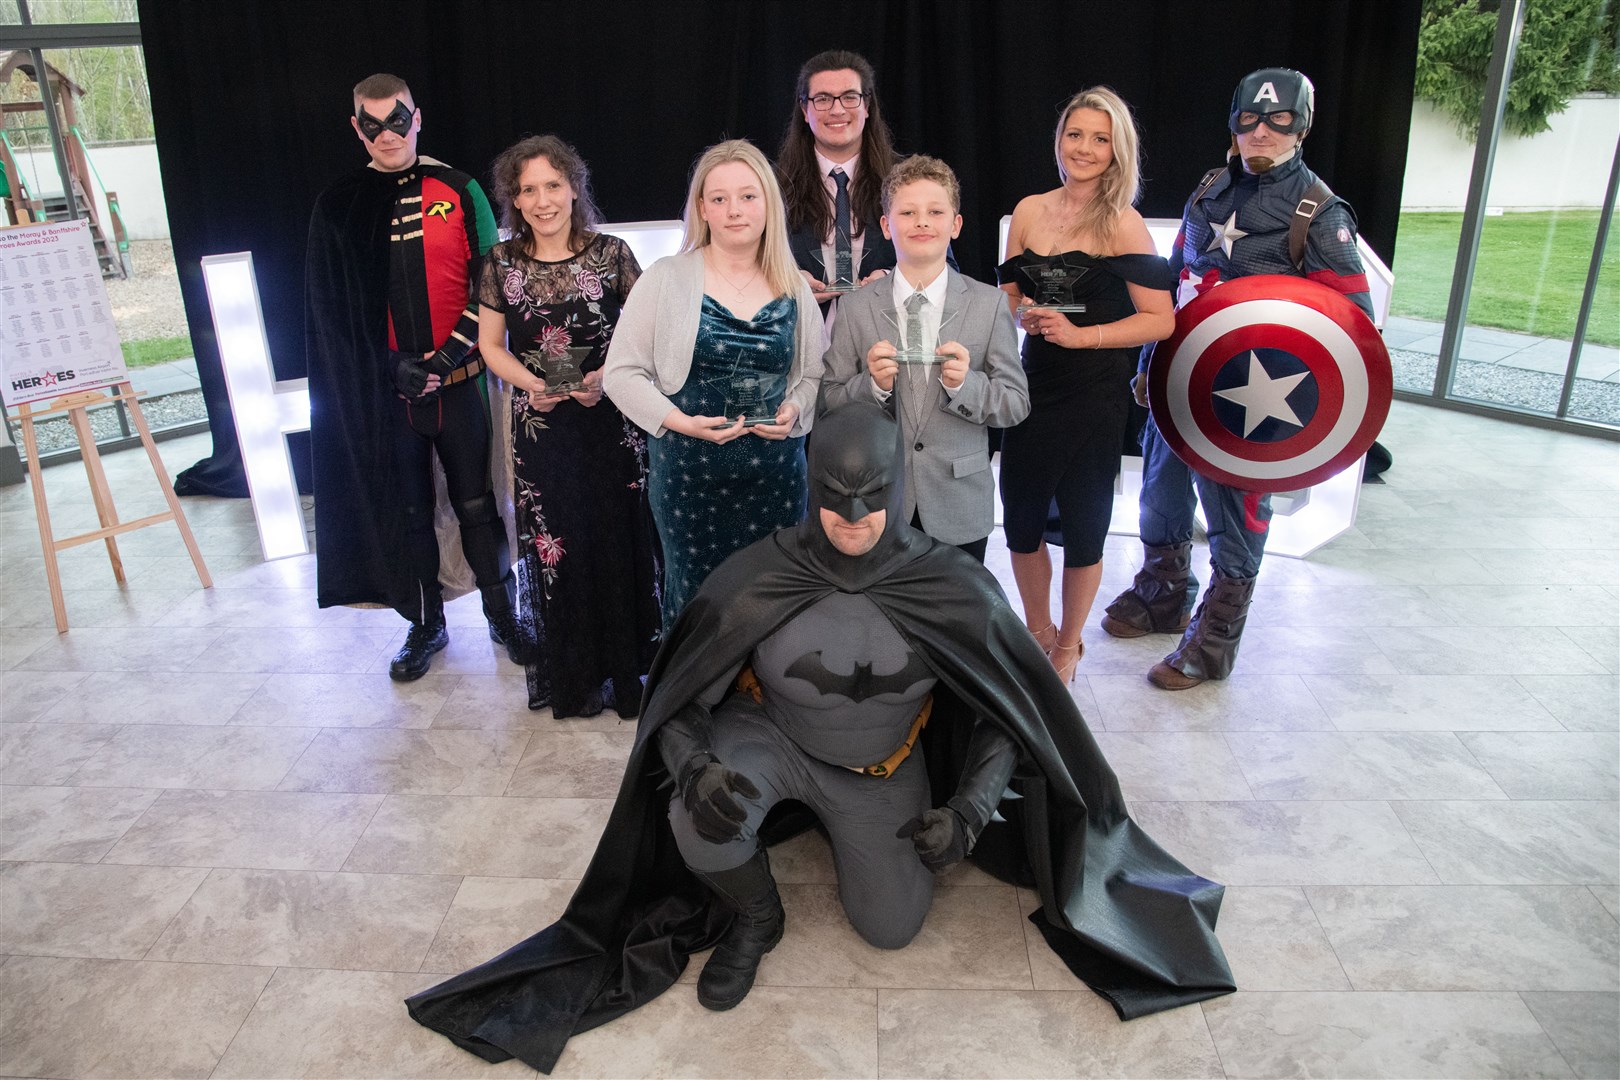 Award winners with the superheroes. Picture: Daniel Forsyth